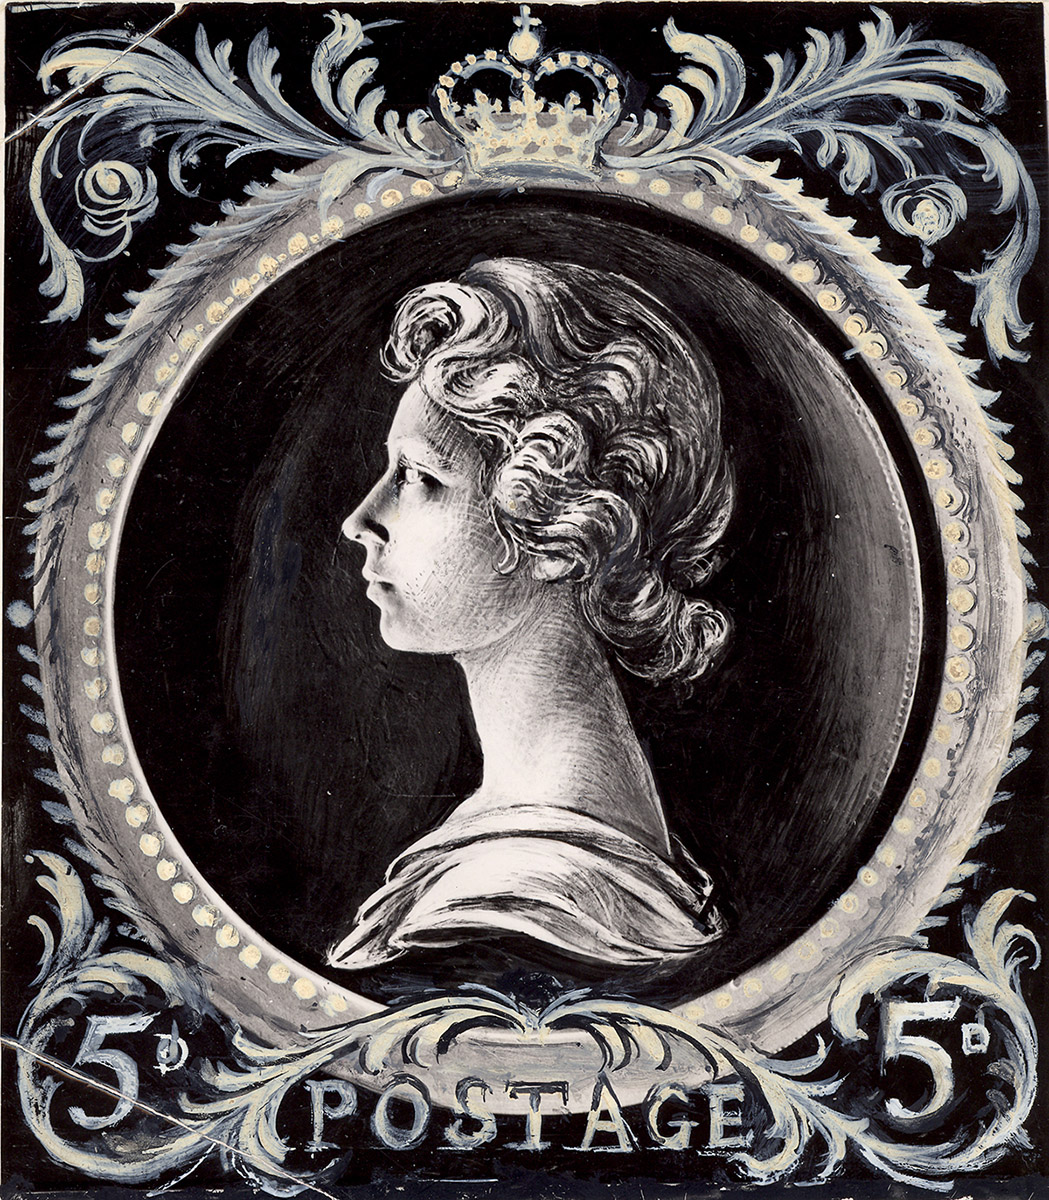 A scan of a black and white drawing, showing a side profile of a young Queen Elizabeth. The drawing has the word 'Postage' along the bottom edge, and '5d' in the bottom right corner.